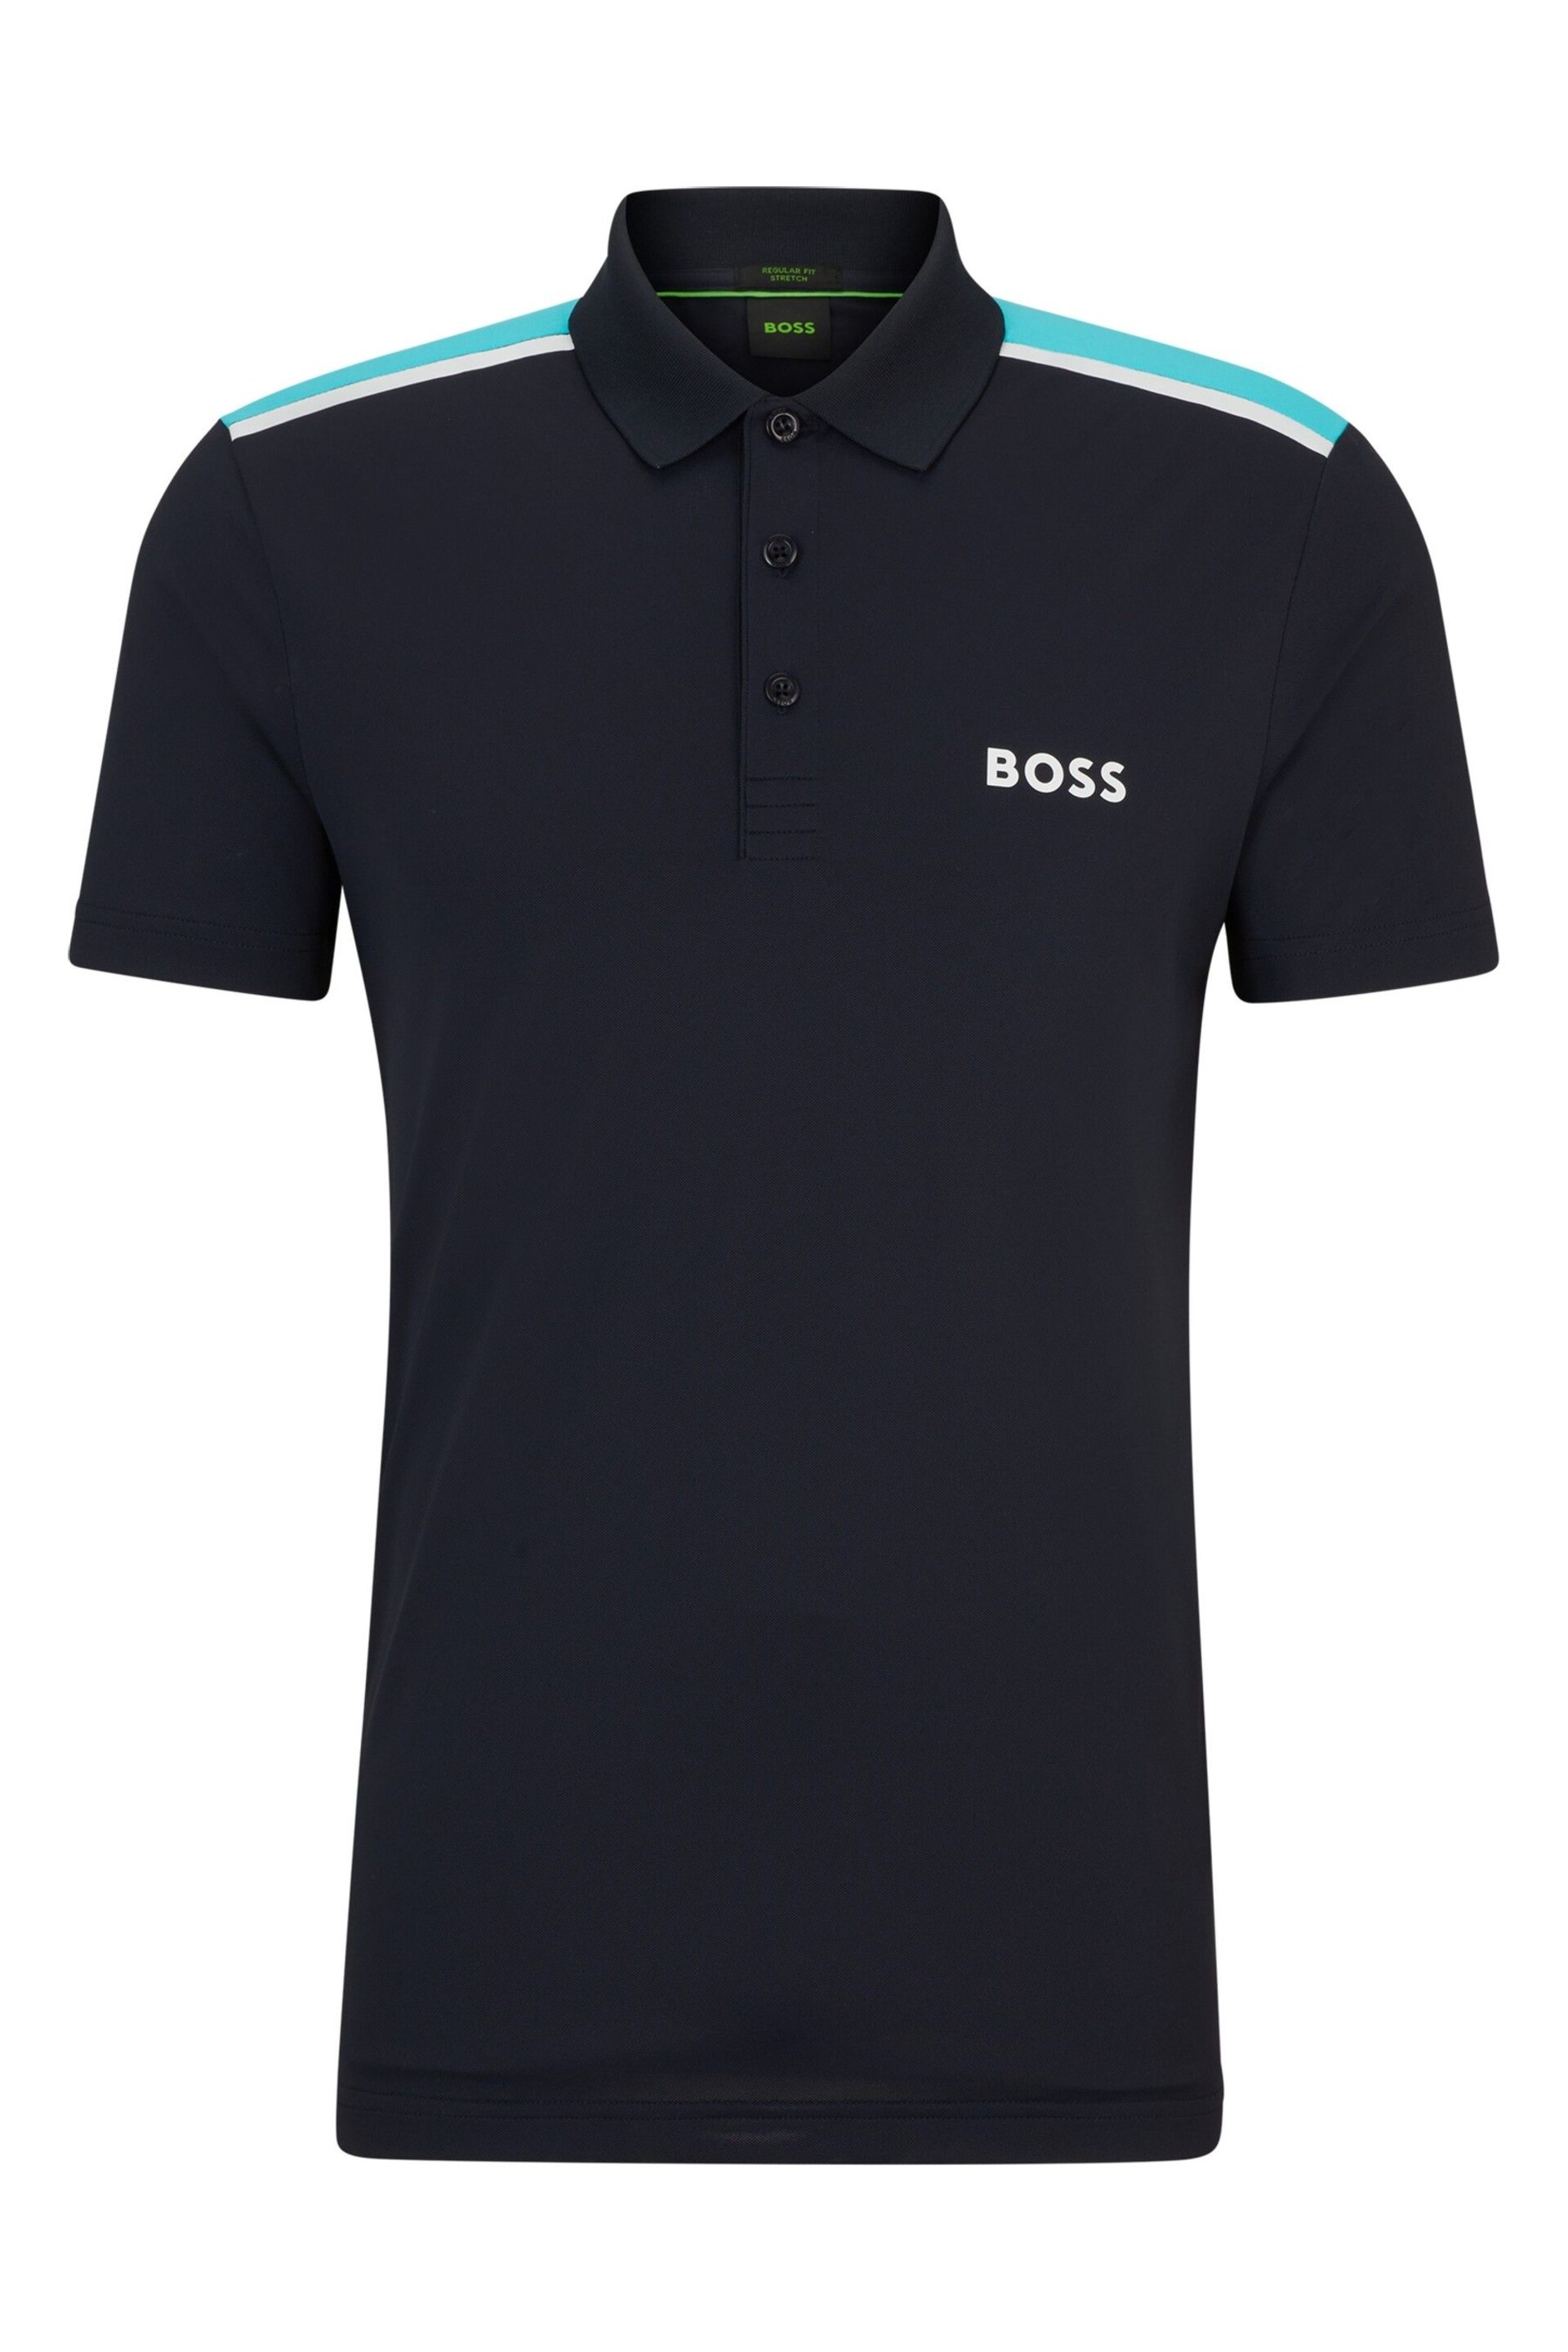 BOSS Black Performance-Stretch Polo Shirt With Contrast Logo - Image 5 of 5